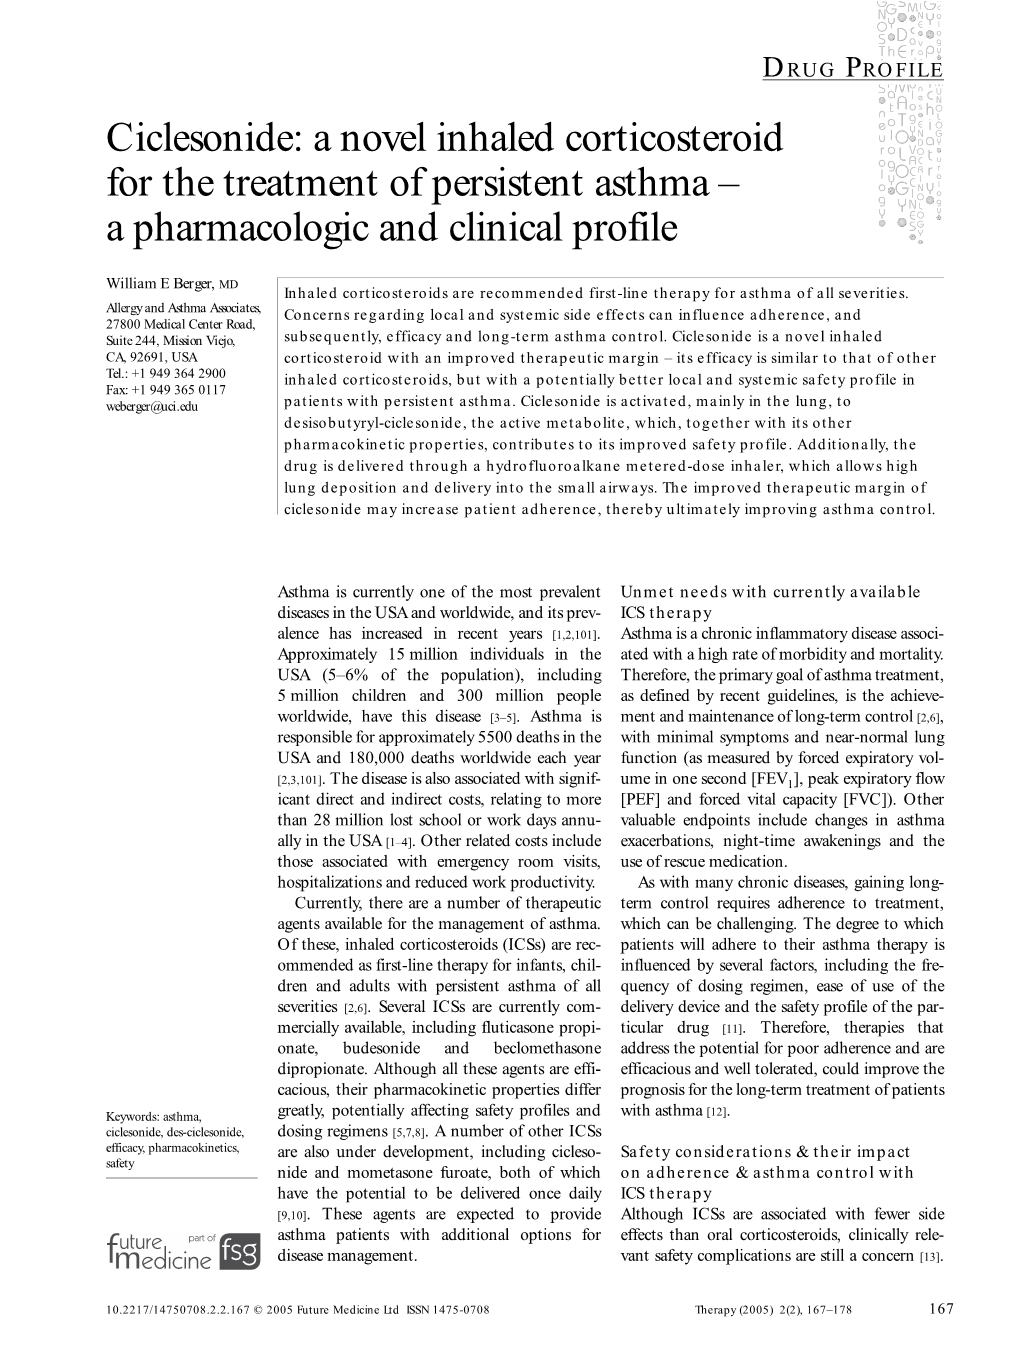 Ciclesonide: a Novel Inhaled Corticosteroid for the Treatment of Persistent Asthma – a Pharmacologic and Clinical Profile